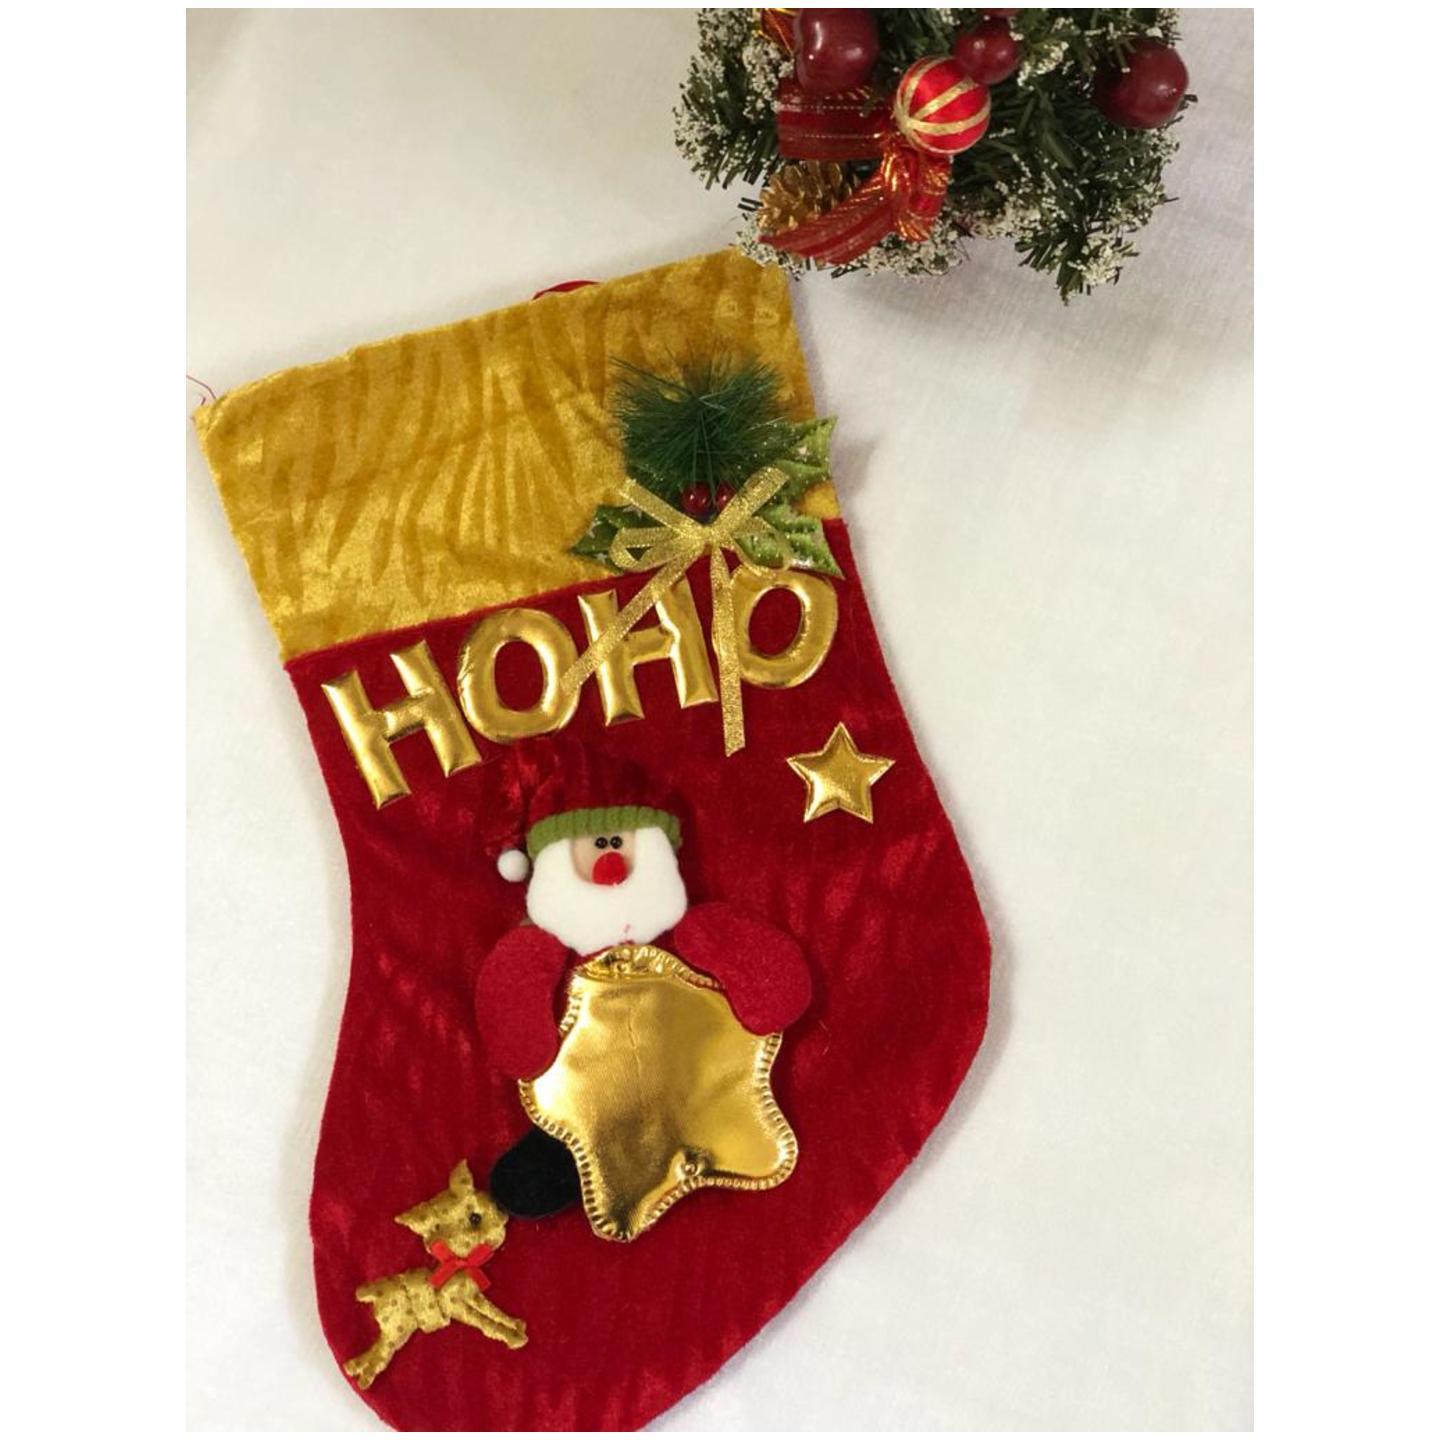 Personalised Stockings - Santa with A Star